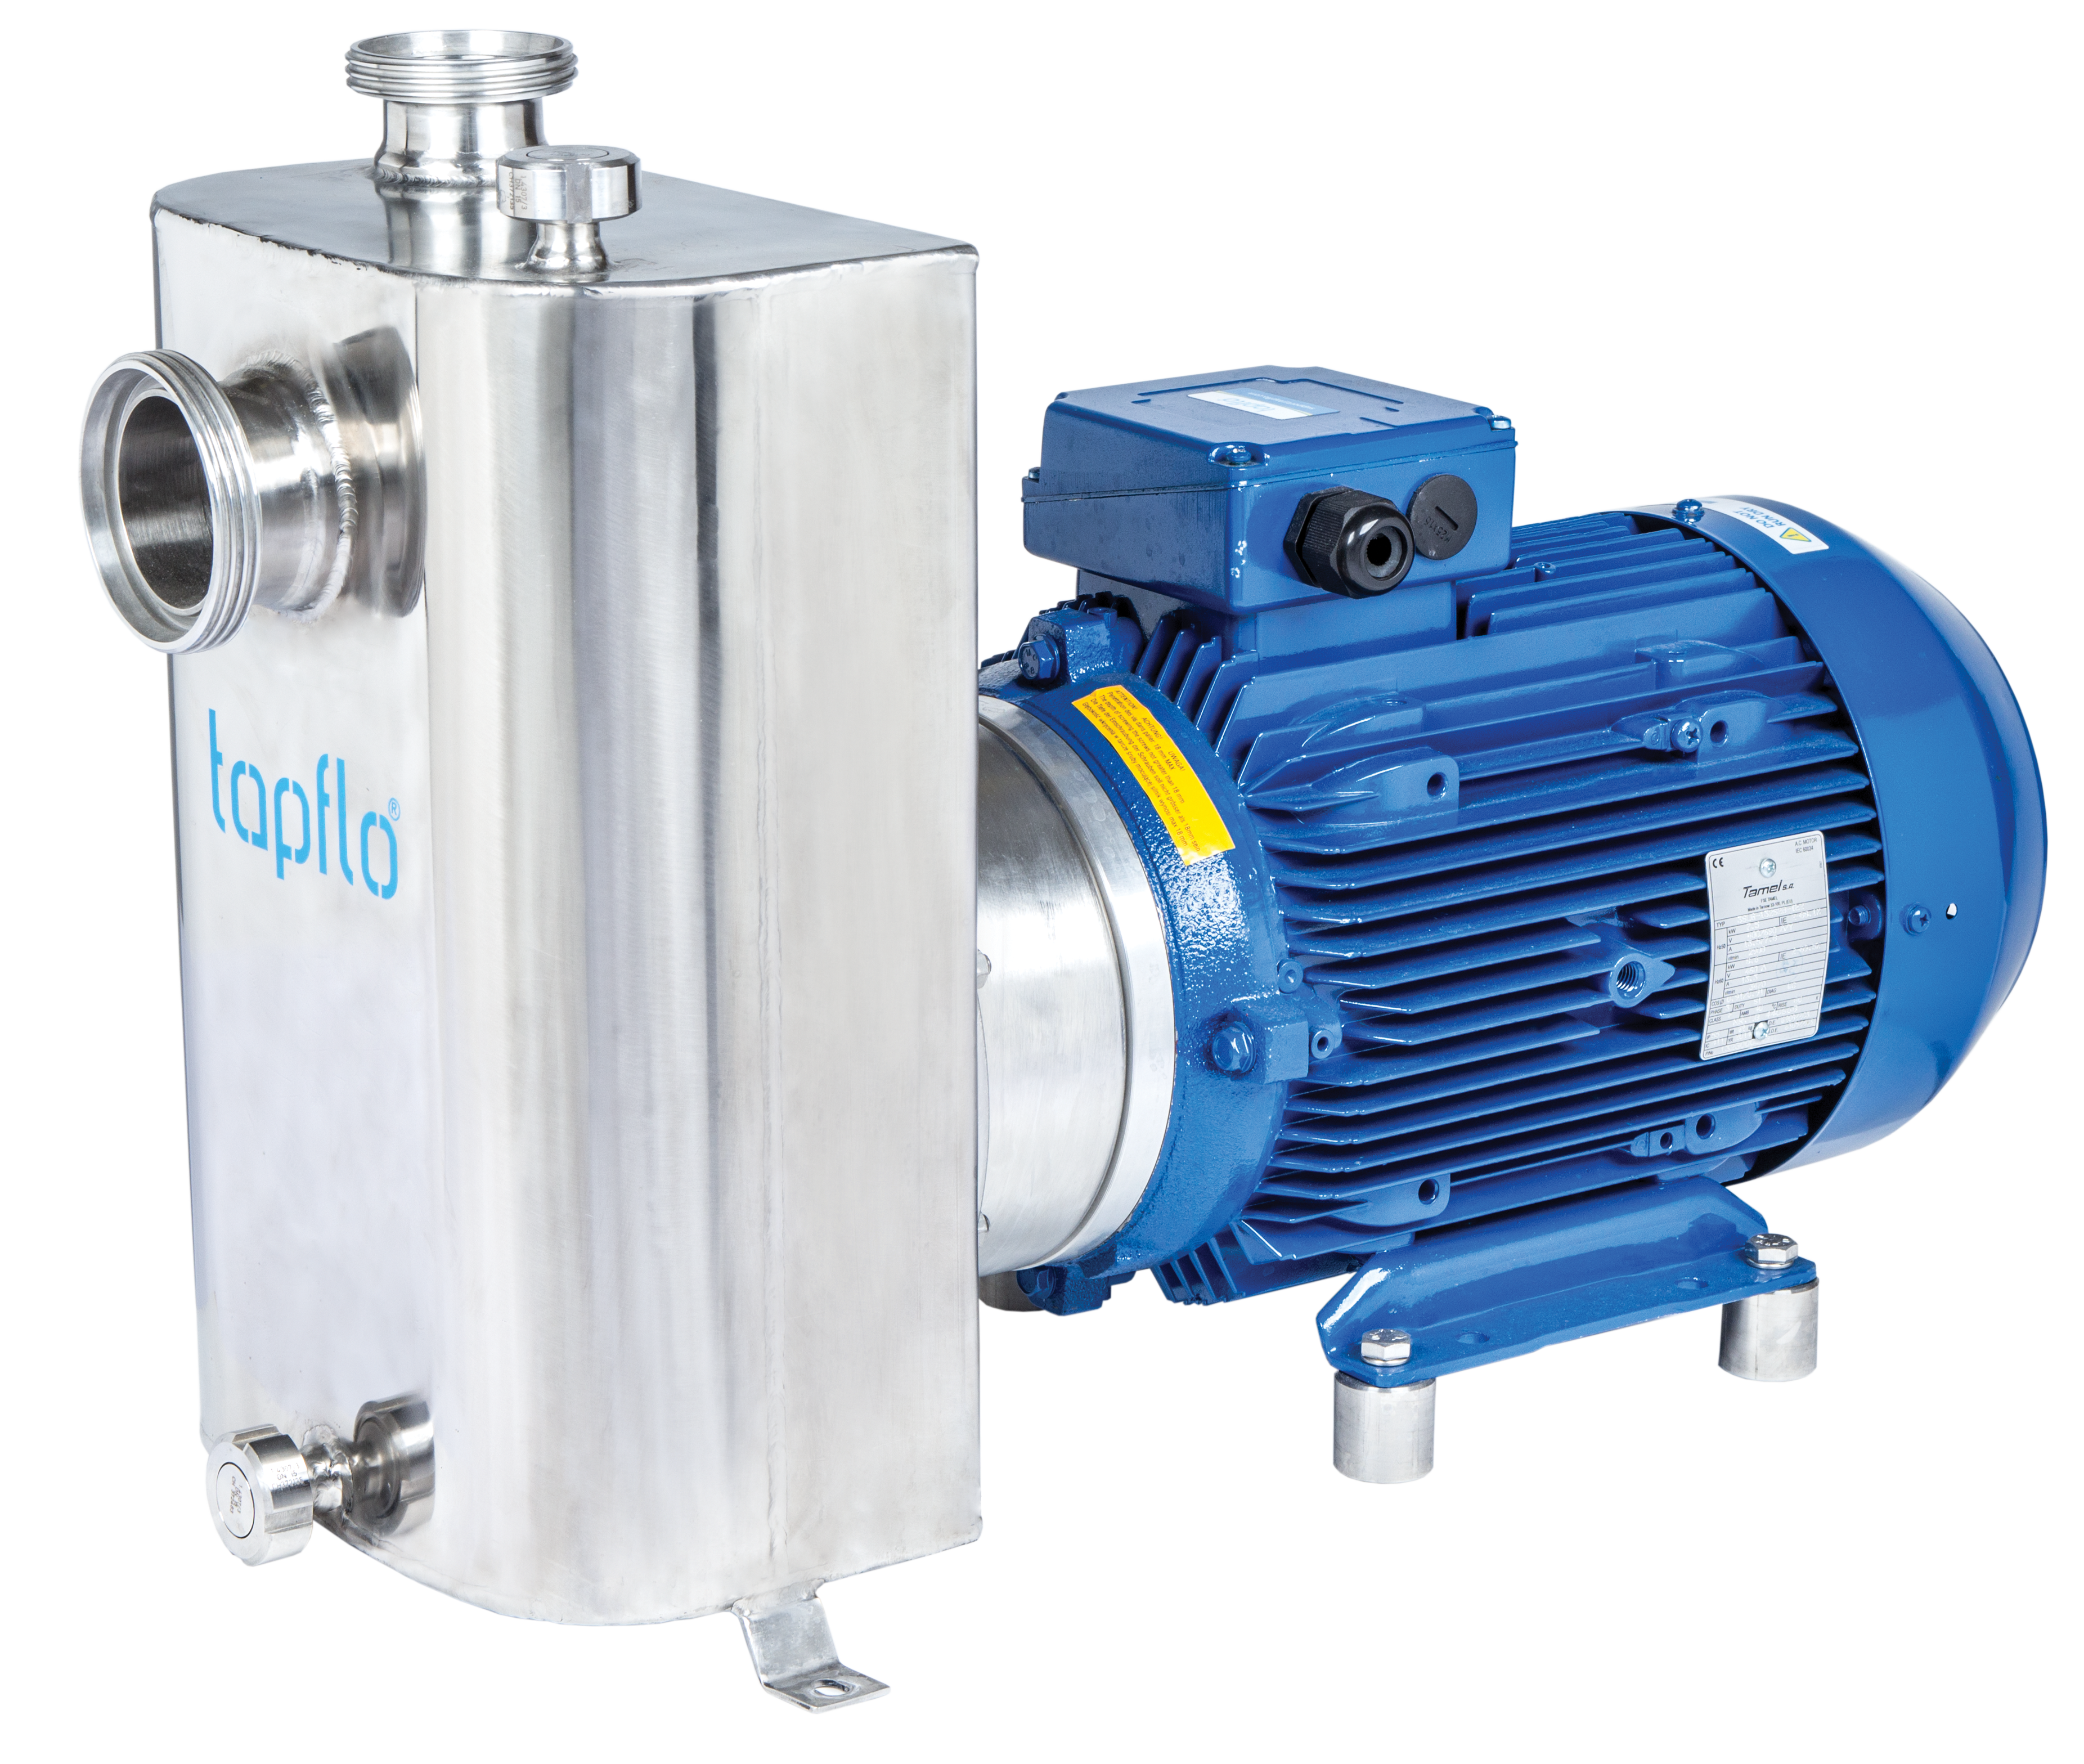 CTS centrifugal pumps